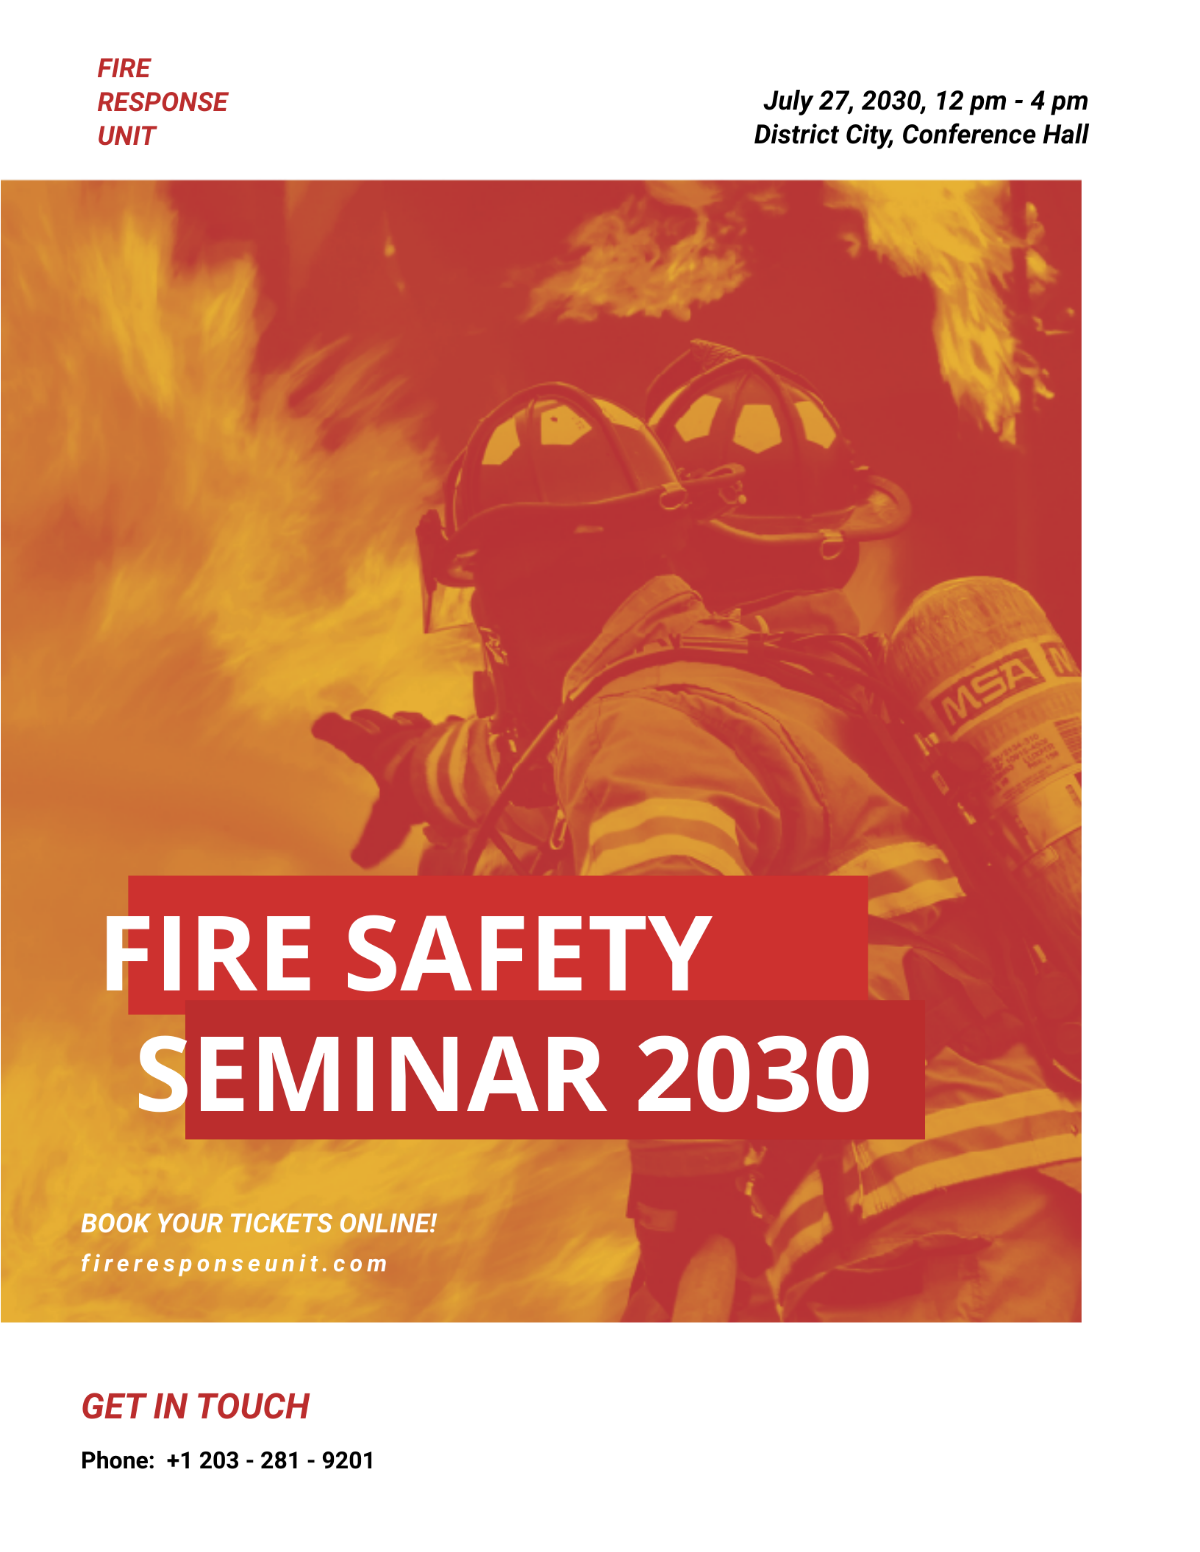 Fire Safety Flyer Template